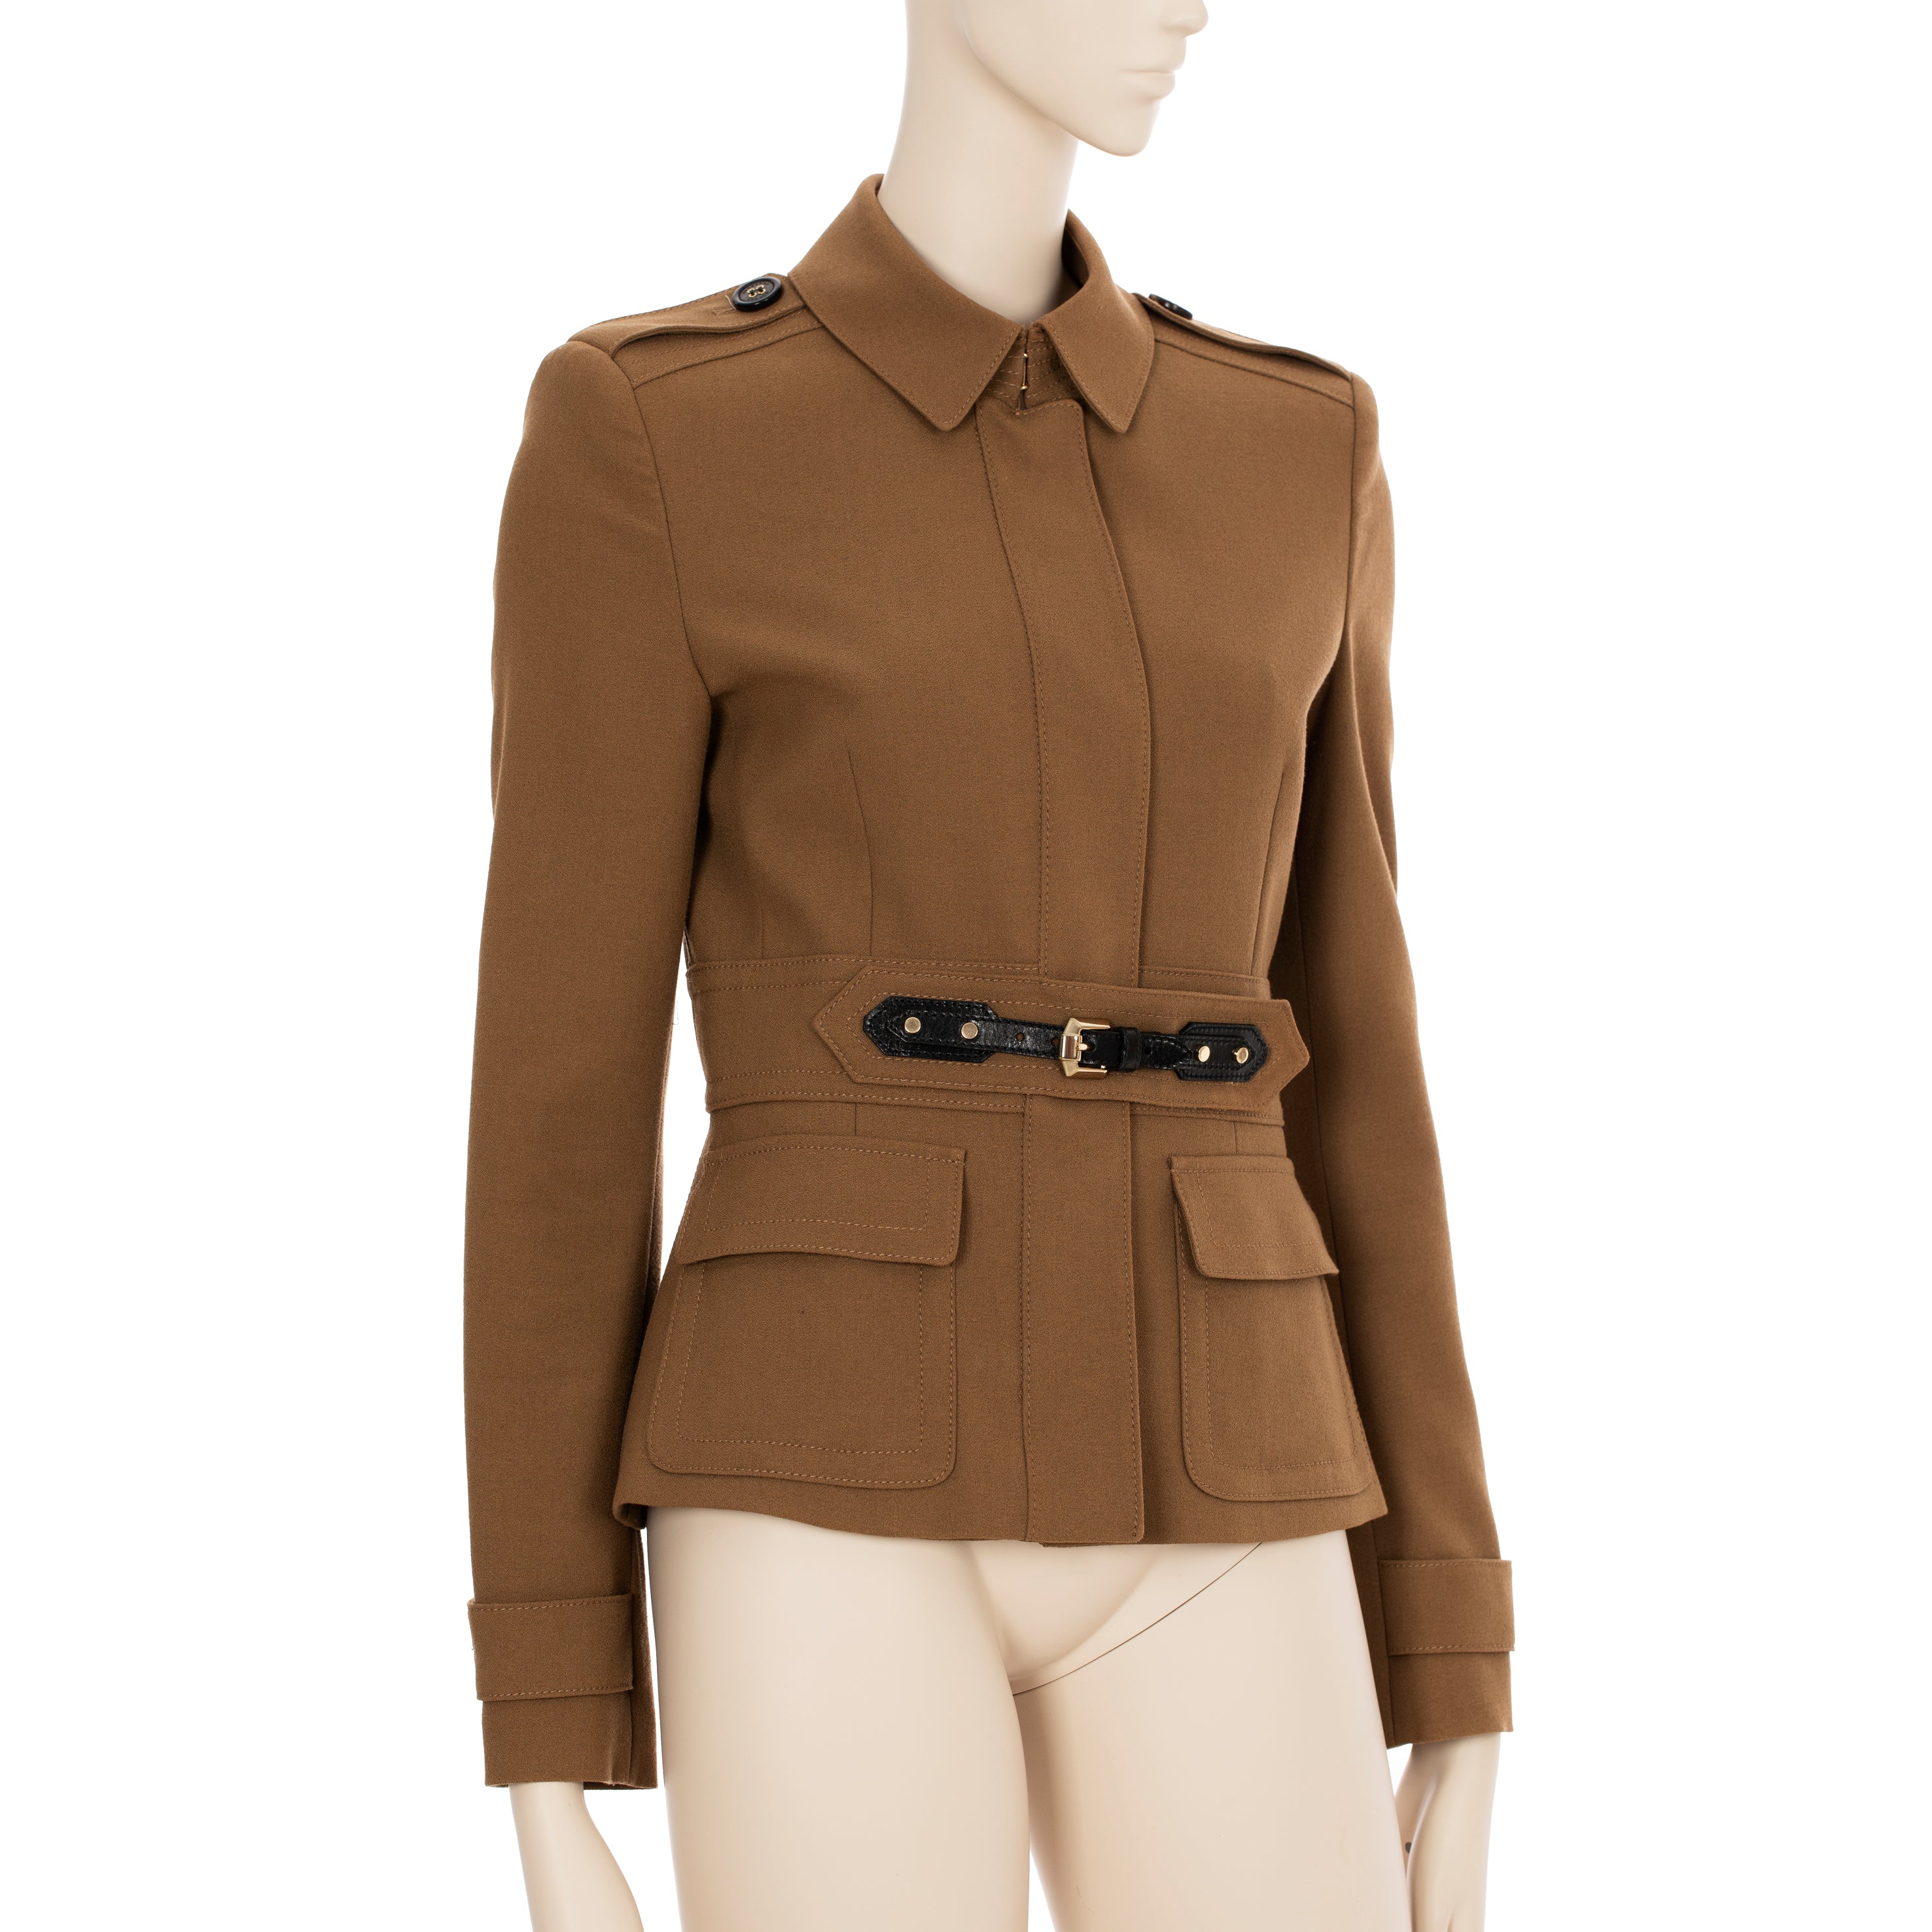 Burberry Cropped Brown Jacket Leather Details 36 IT